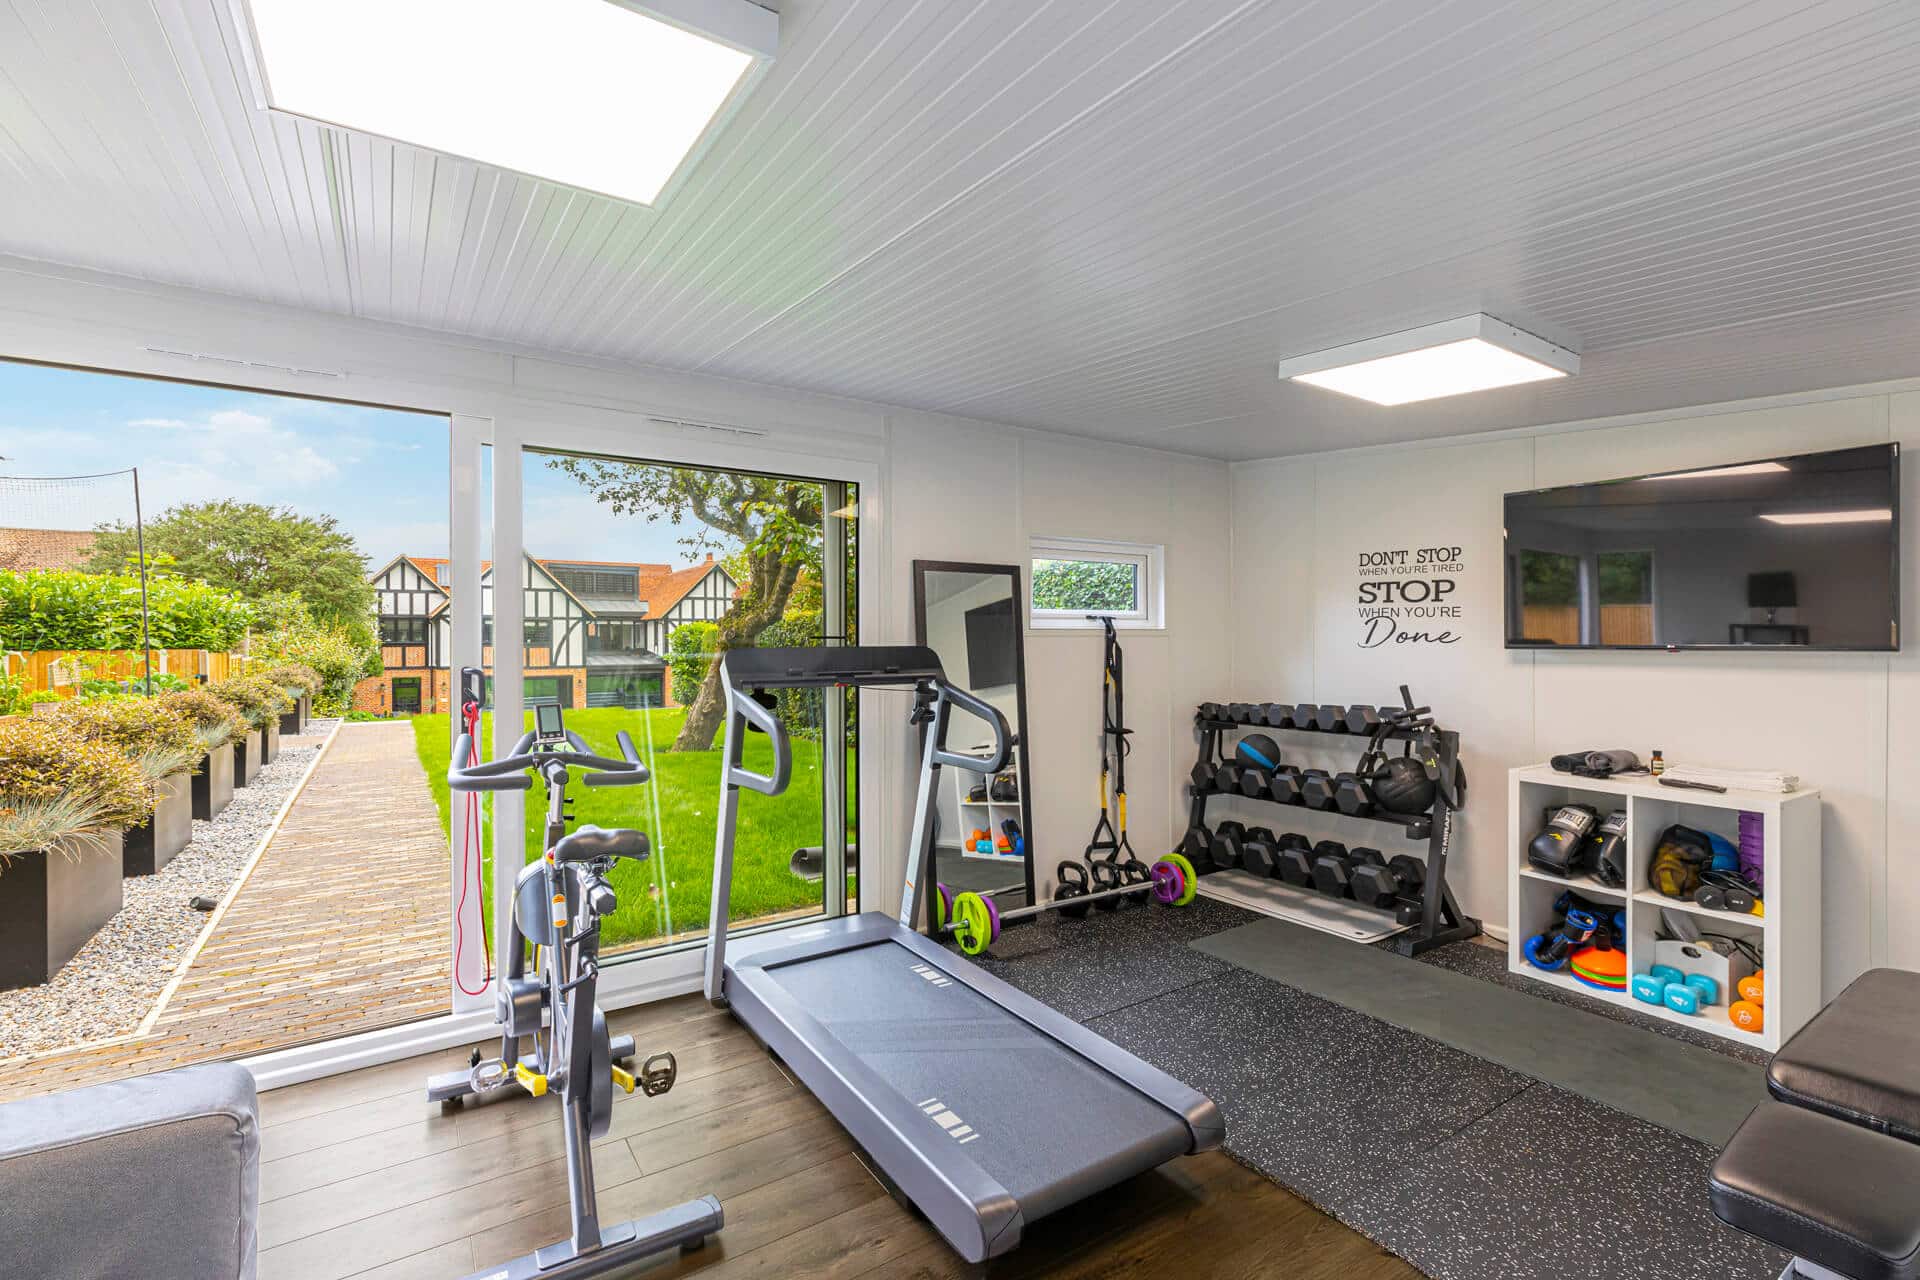 How to make a cheap home gym - Save the Student